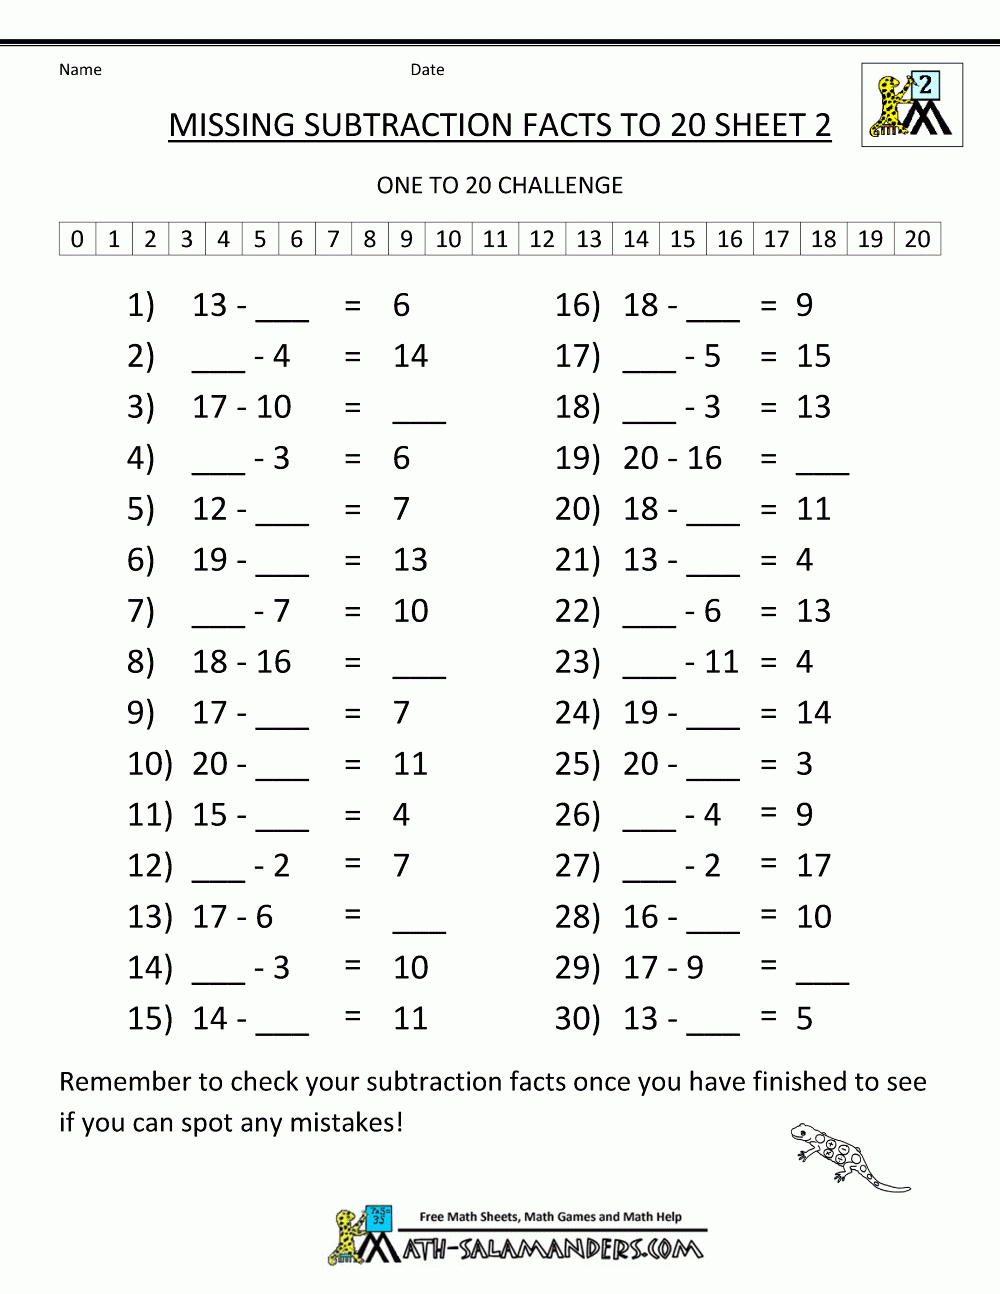 Math Worksheets For 2Nd Grade Missing Subtraction Facts To 20 2 - Free Printable Subtraction Worksheets For 2Nd Grade